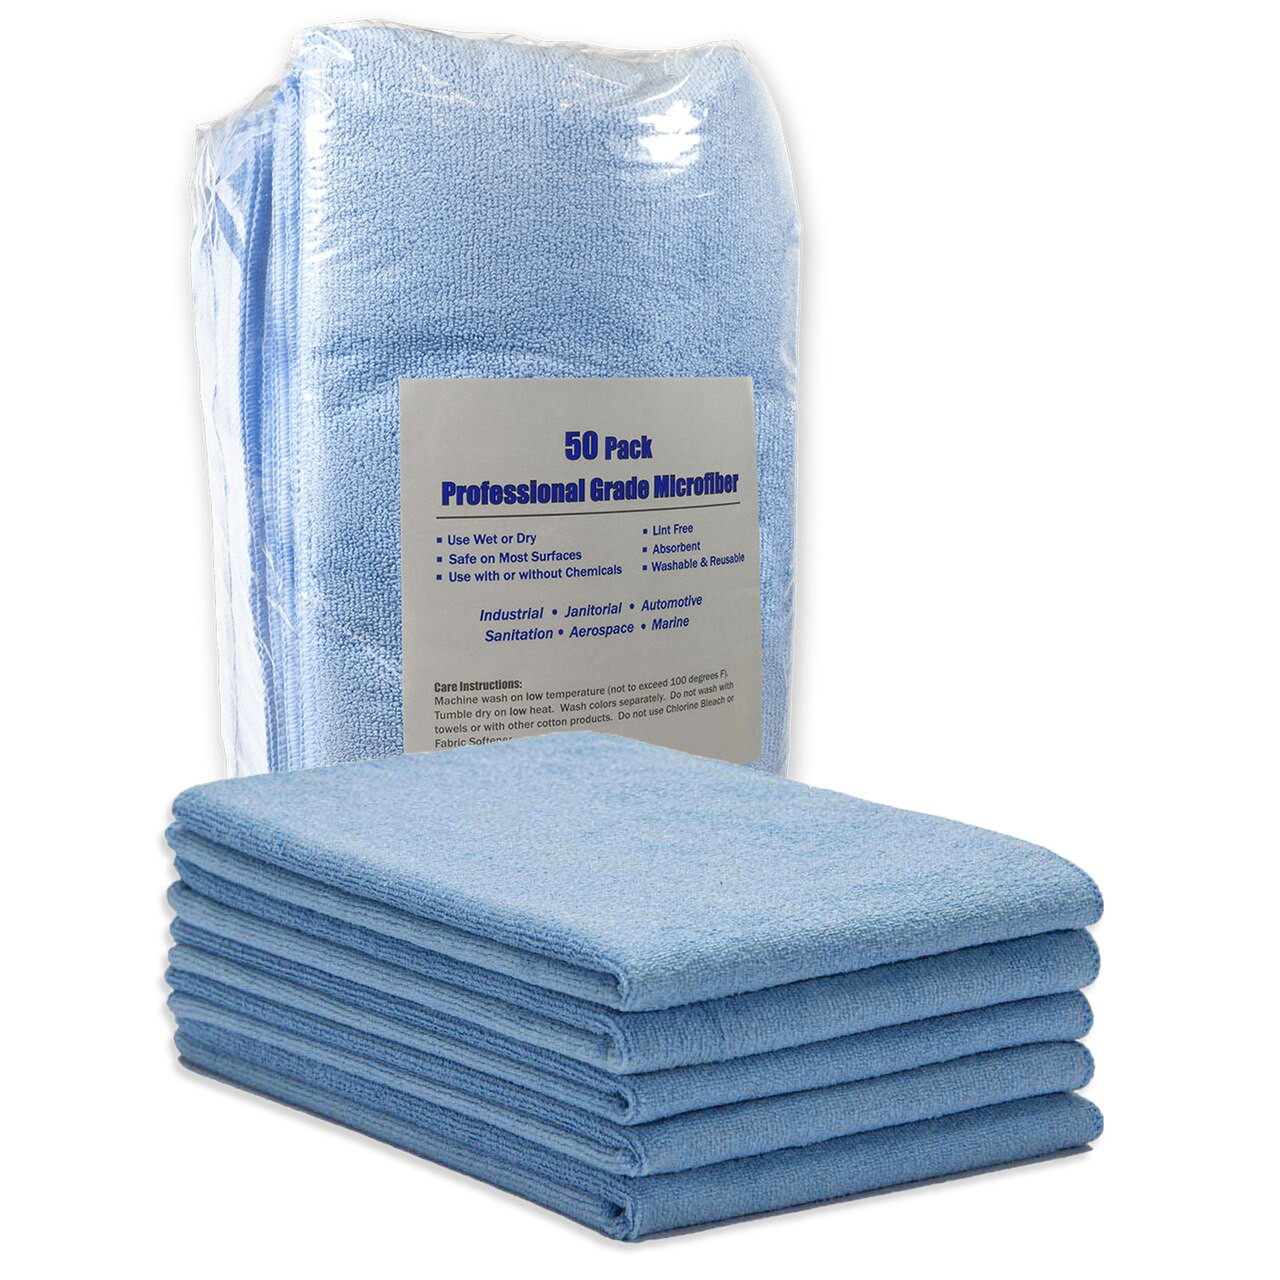 How to properly wash and care for microfiber towels - Professional  Carwashing & Detailing